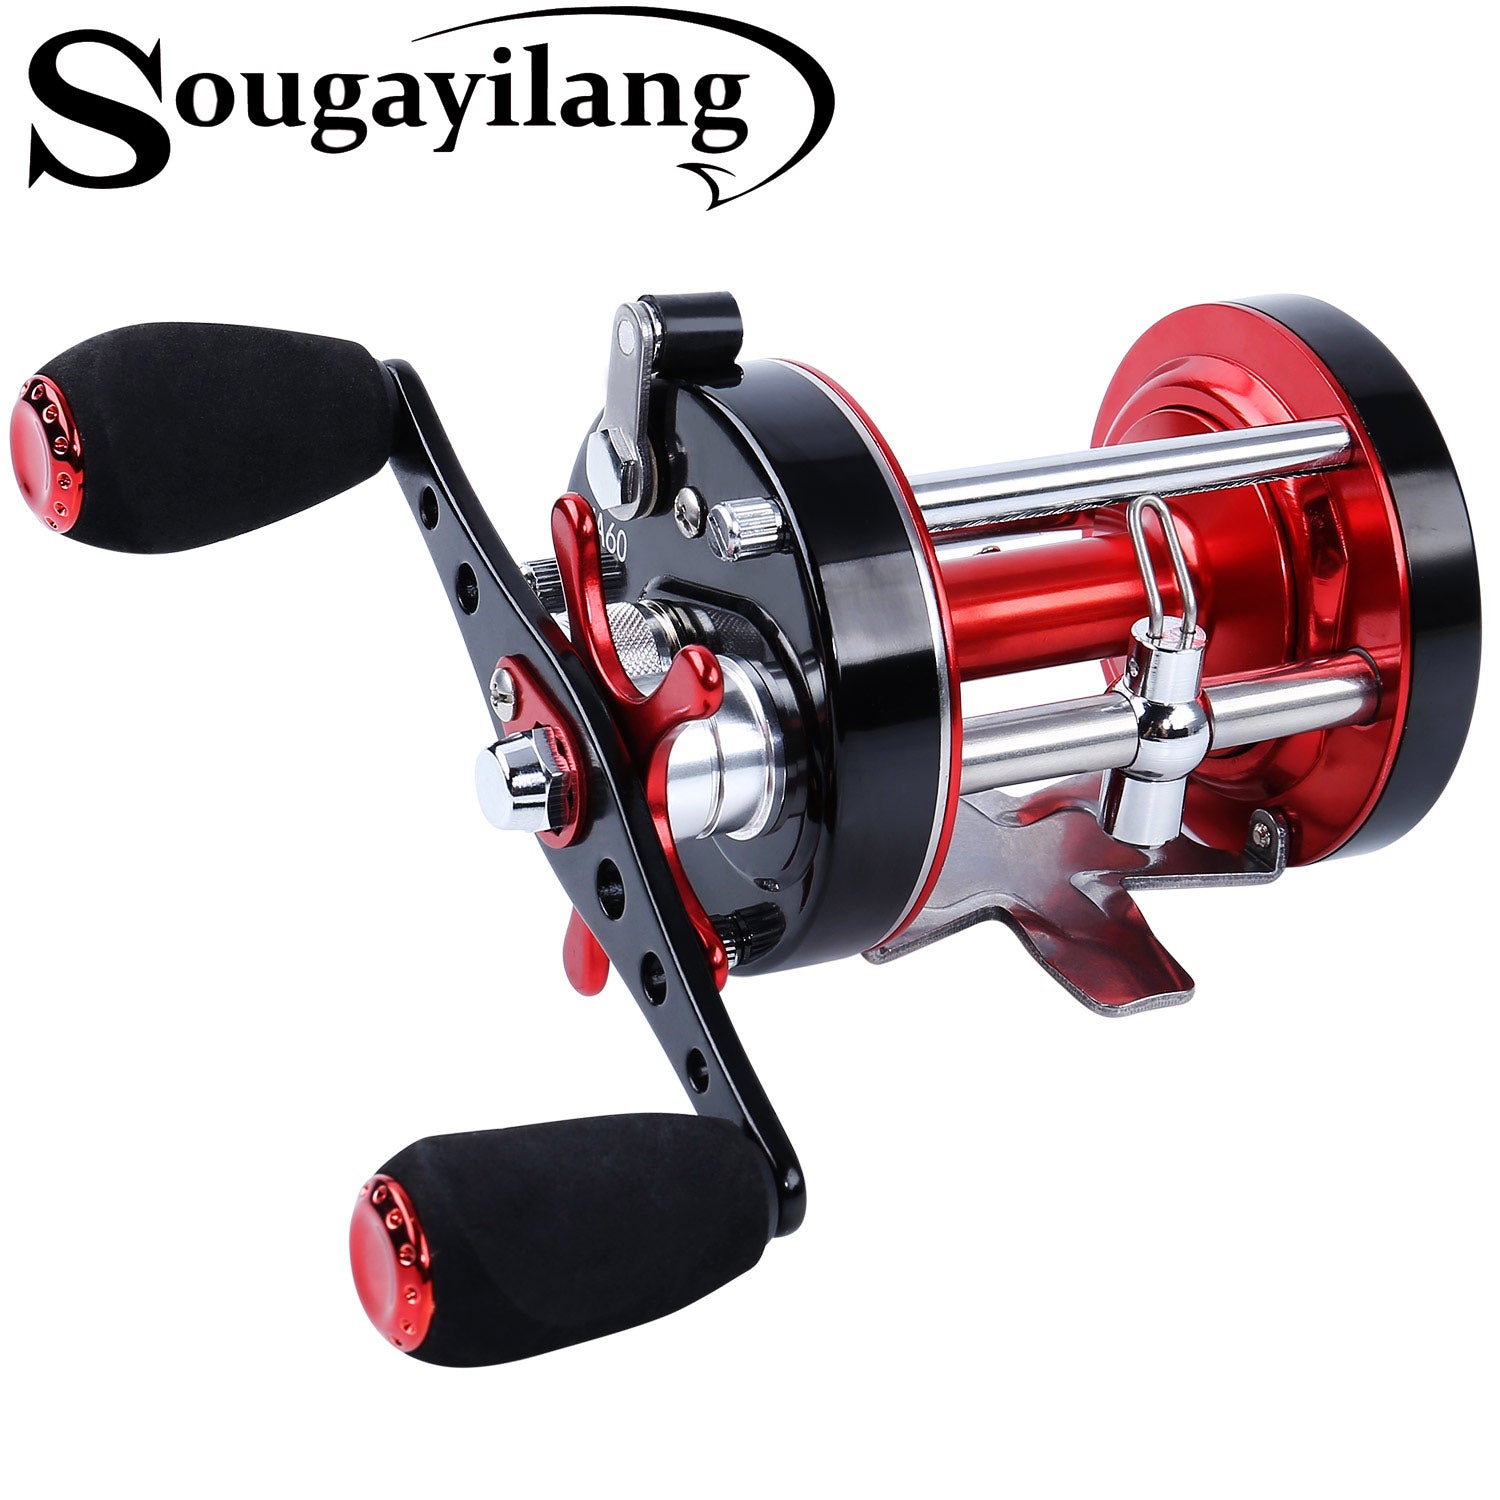 Sougayilang Fishing Reels Round Baitcasting Reel - Conventional Reel -  Reinforced Metal Body and Supreme Star Drag